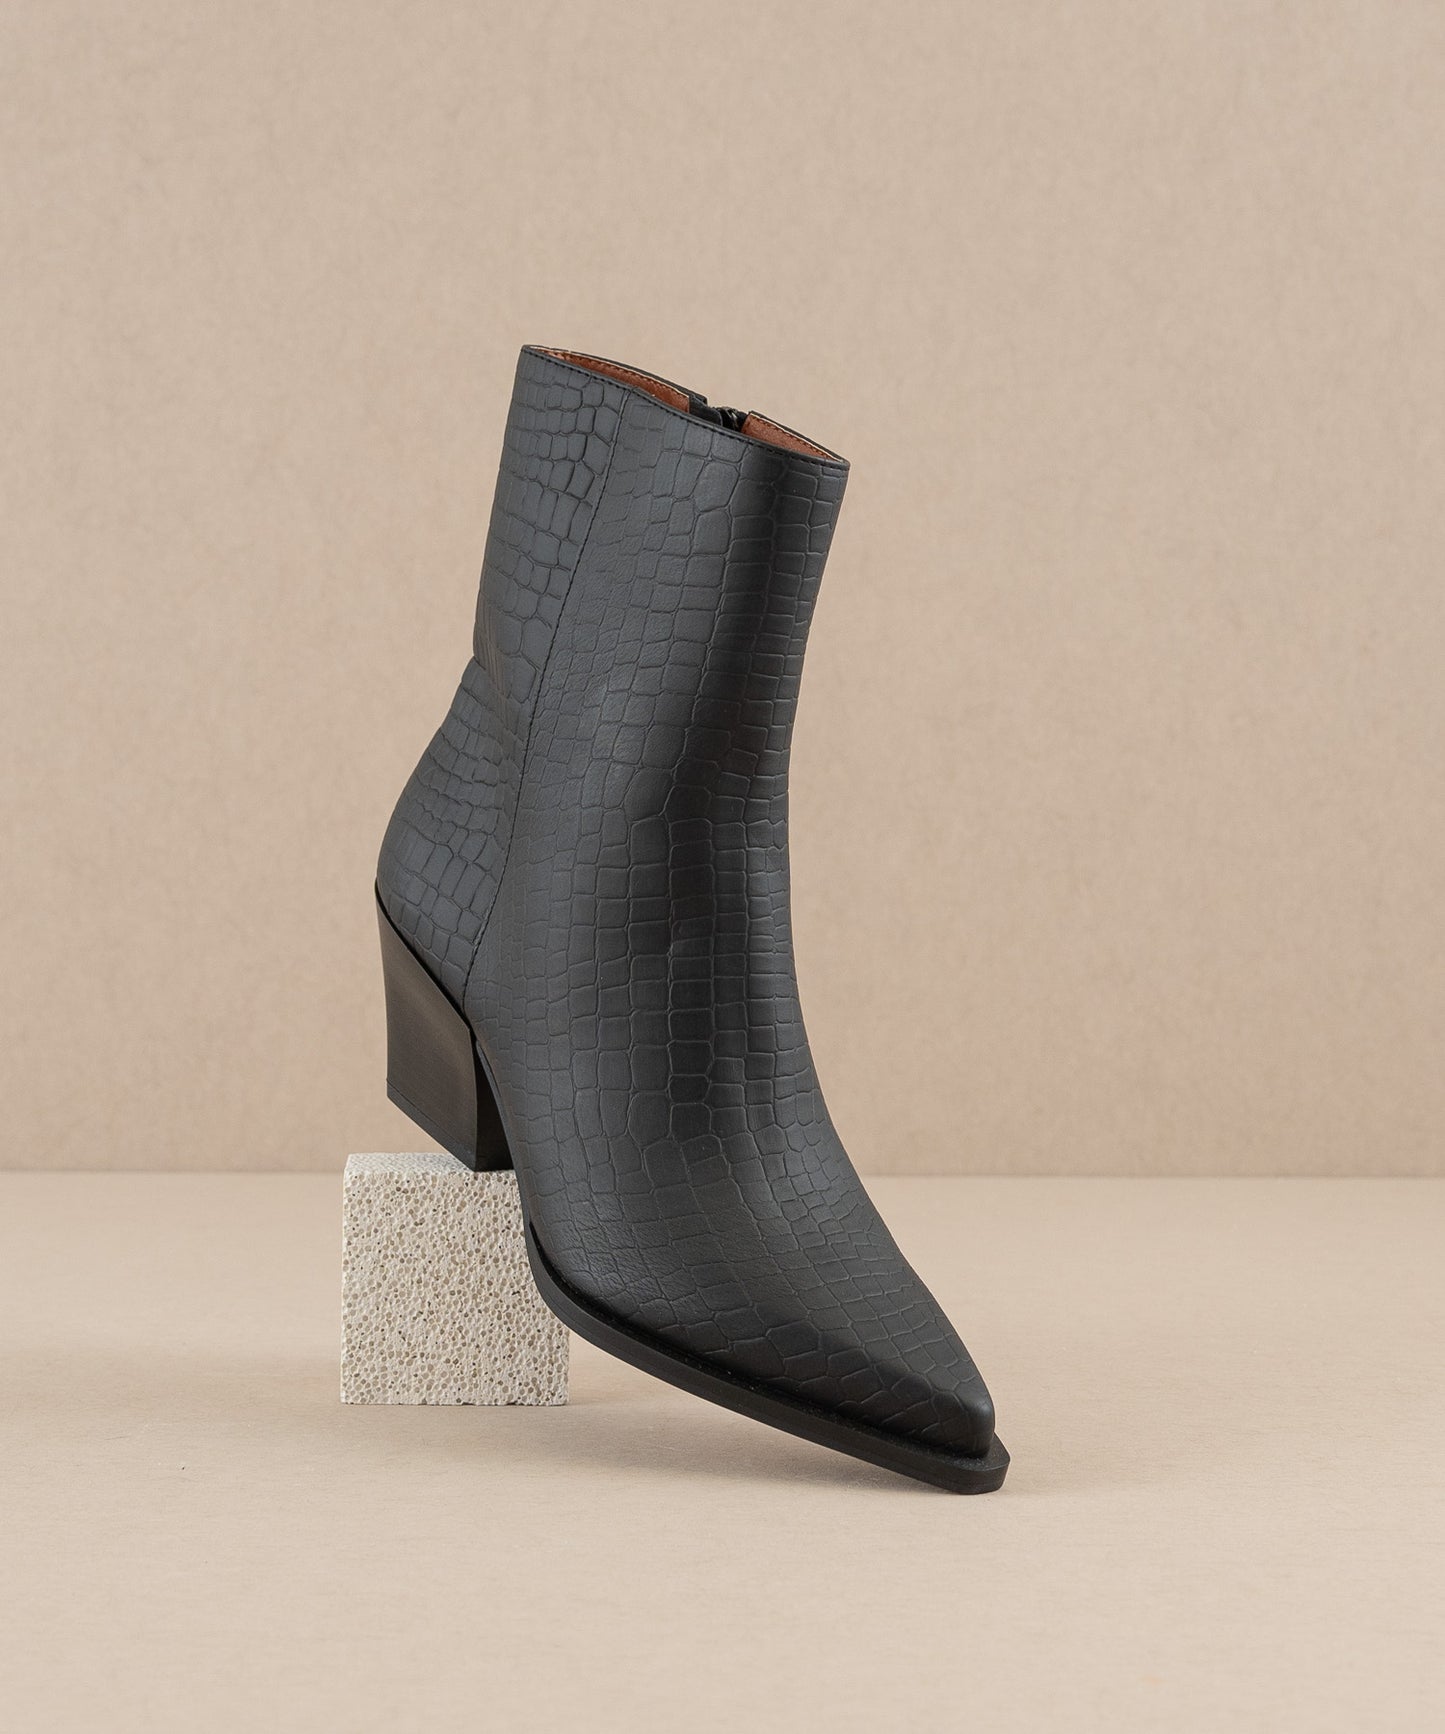 The Miley - Black Alligator print pointed toe bootie